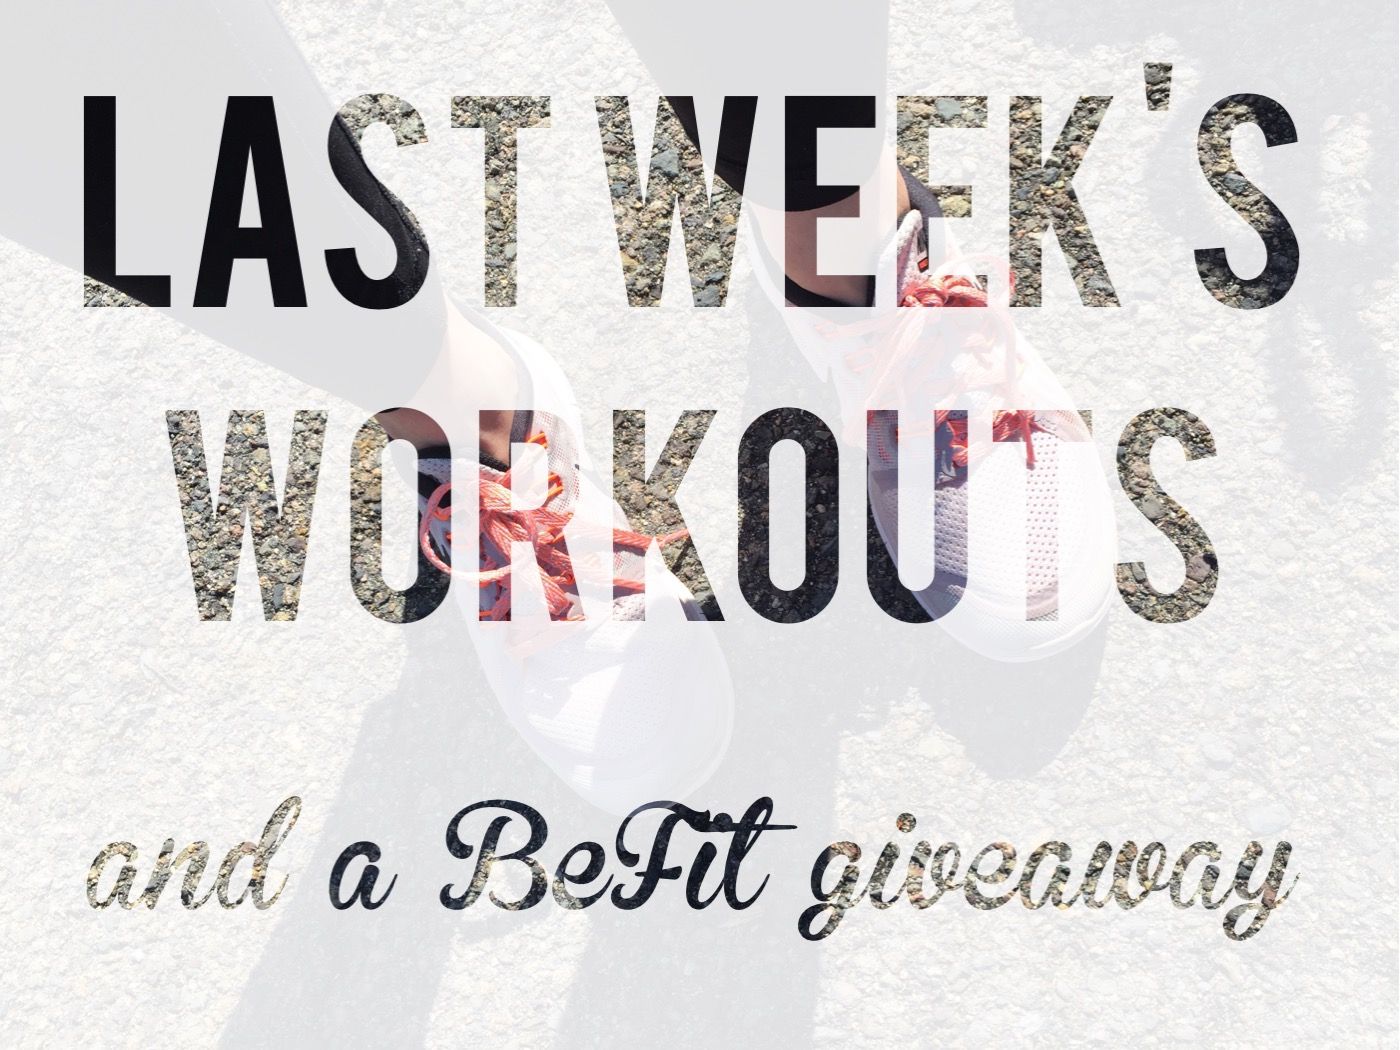 last weeks workouts be fit giveaway